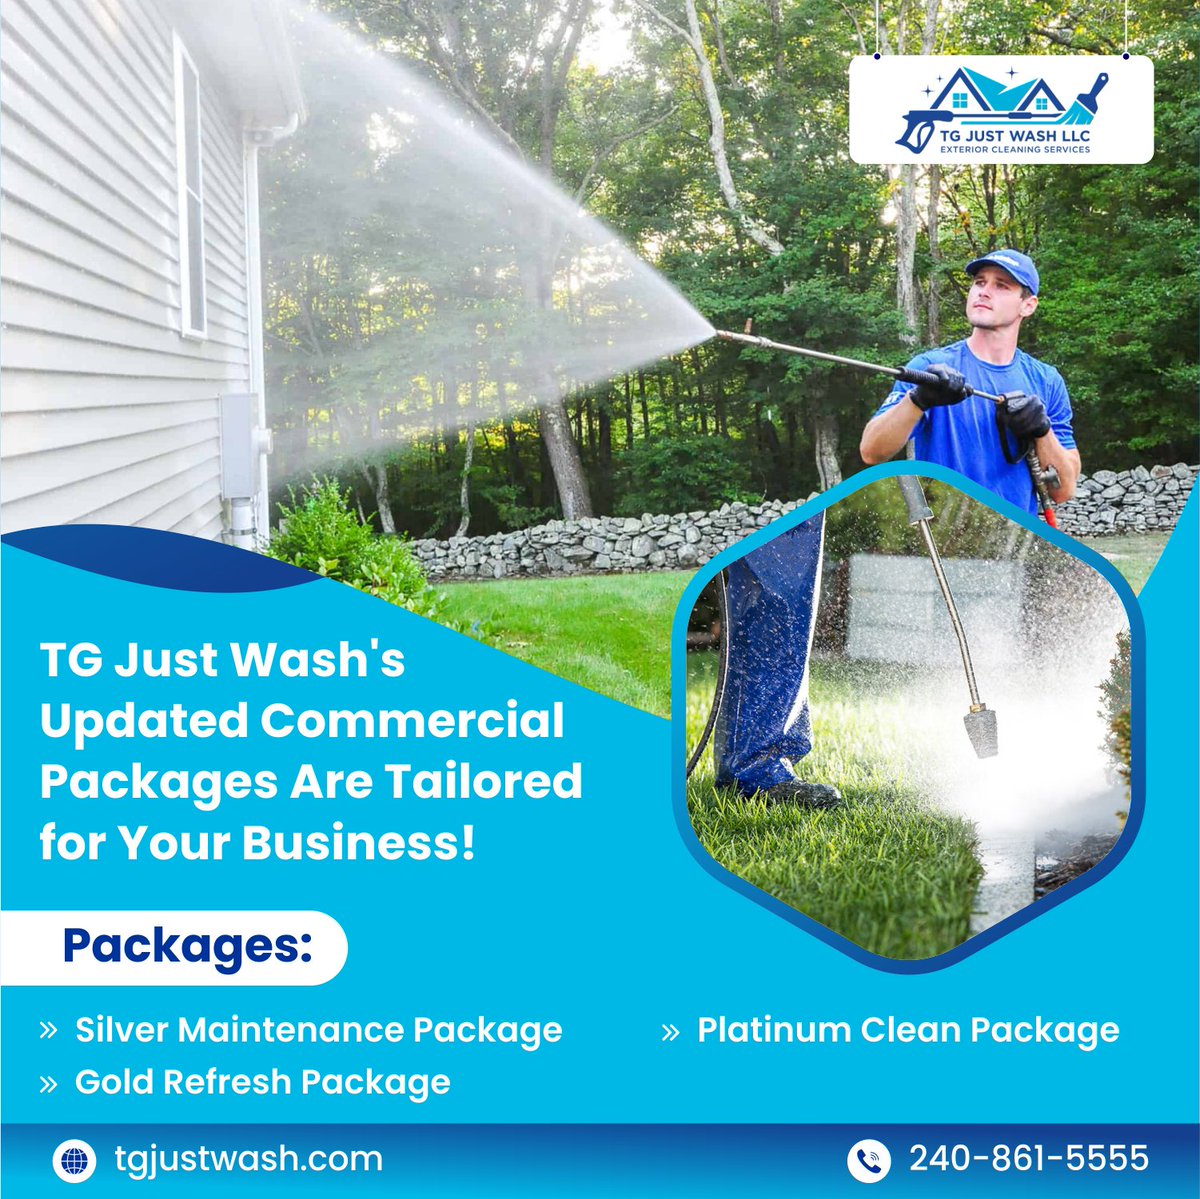 Transform your commercial property with TG Just Wash LLC's updated commercial package services.
tgjustwash.com/packages/comme…

#tgjustwash #exteriorcleaning #residentialspaces #commercialspaces #cleaning #softwashing  #cleaningcompany #washingtondc #maryland #riverdale #virginia #usa